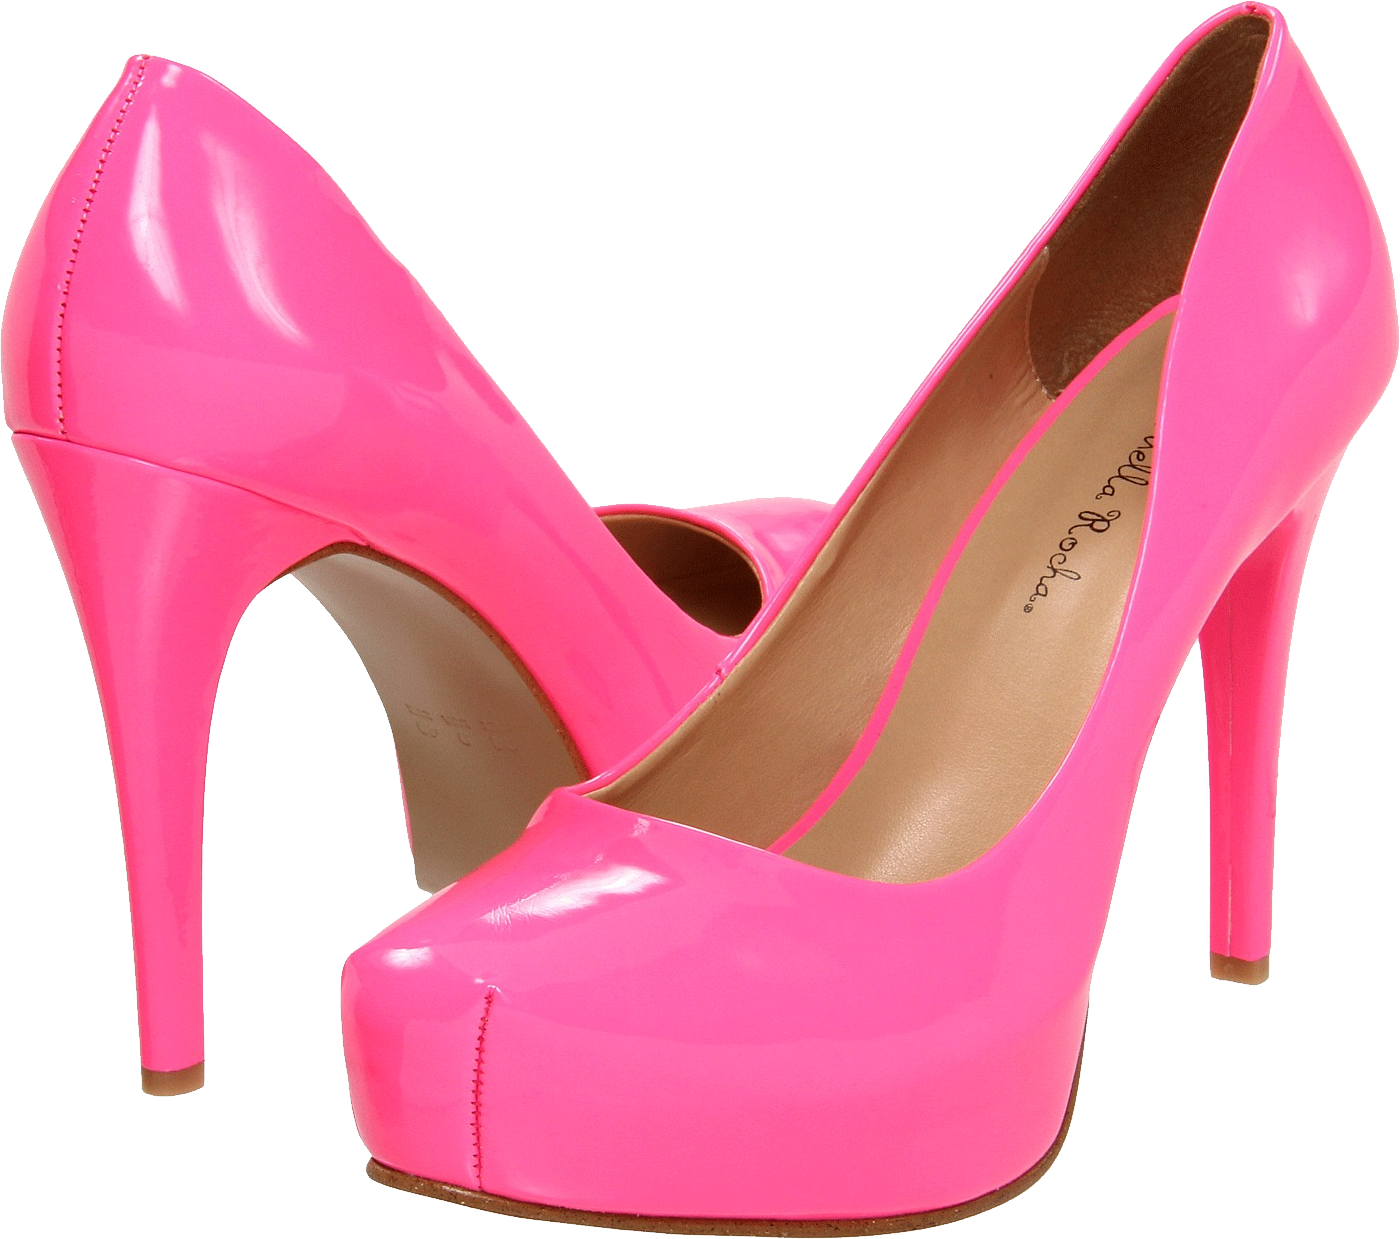 Pink women shoes png image #45075 - Free Icons and PNG Backgrounds